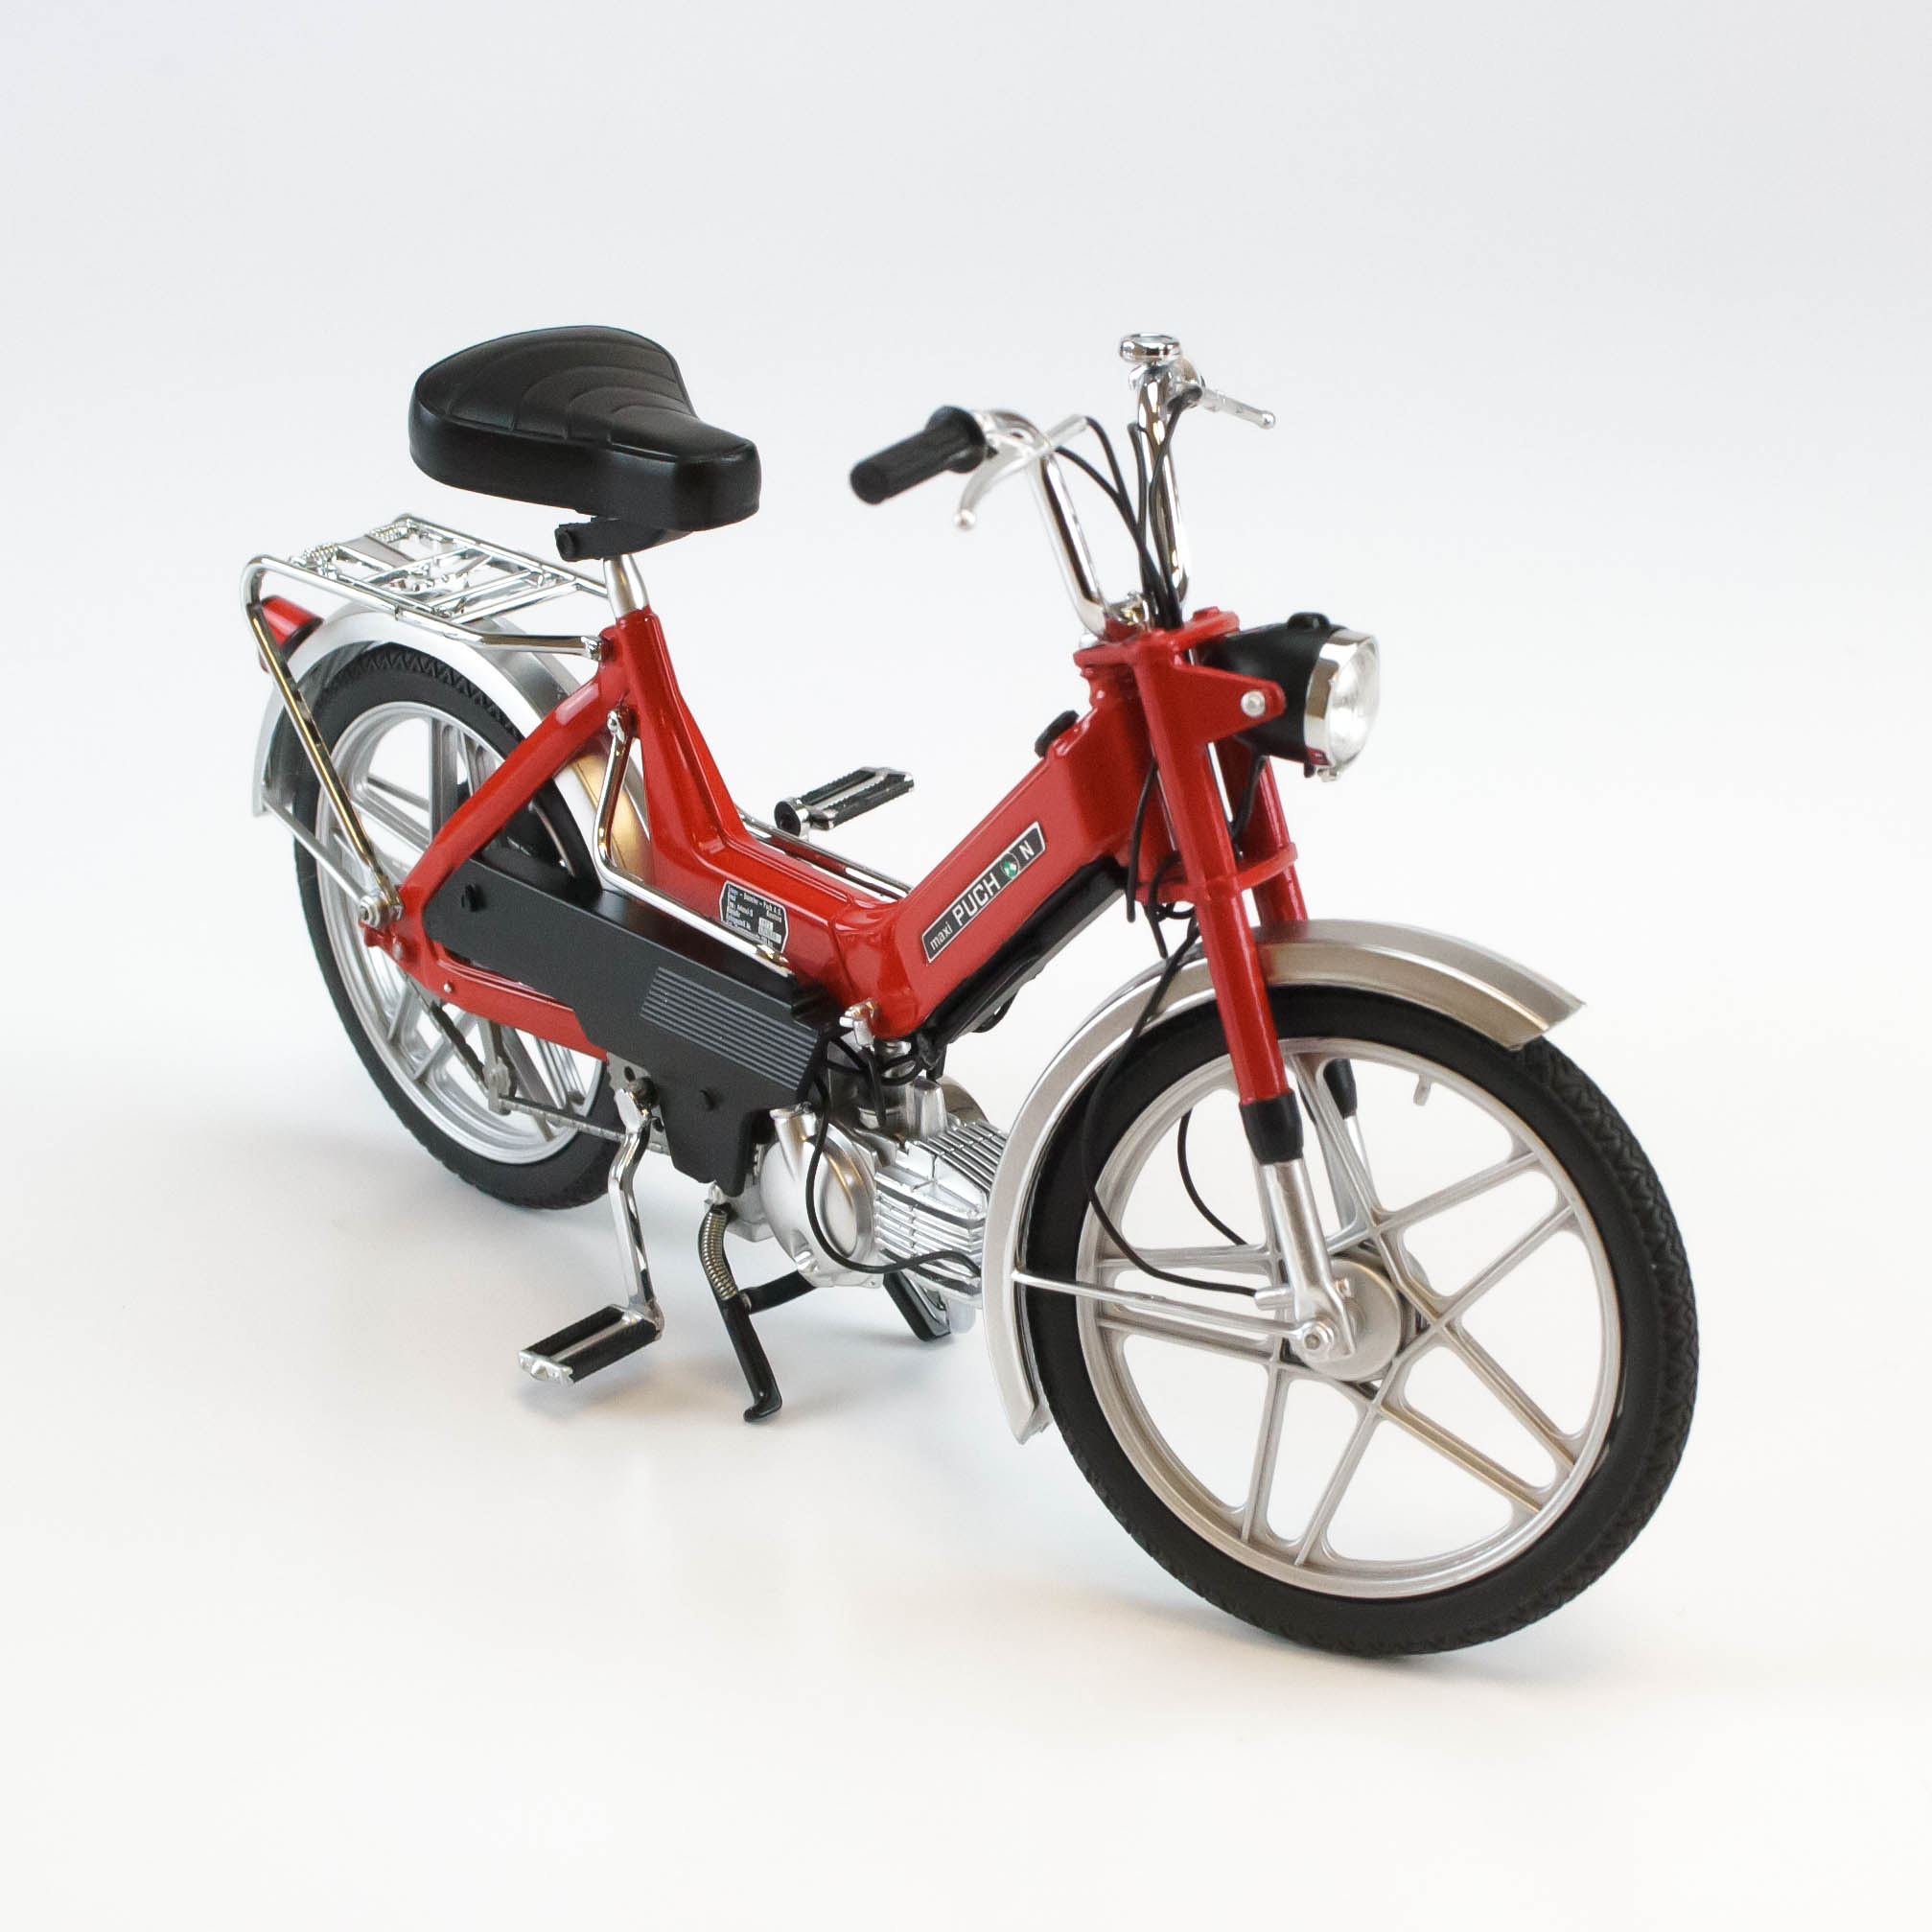 Model Puch Maxi red scale 1:10 - Mopedrenovering